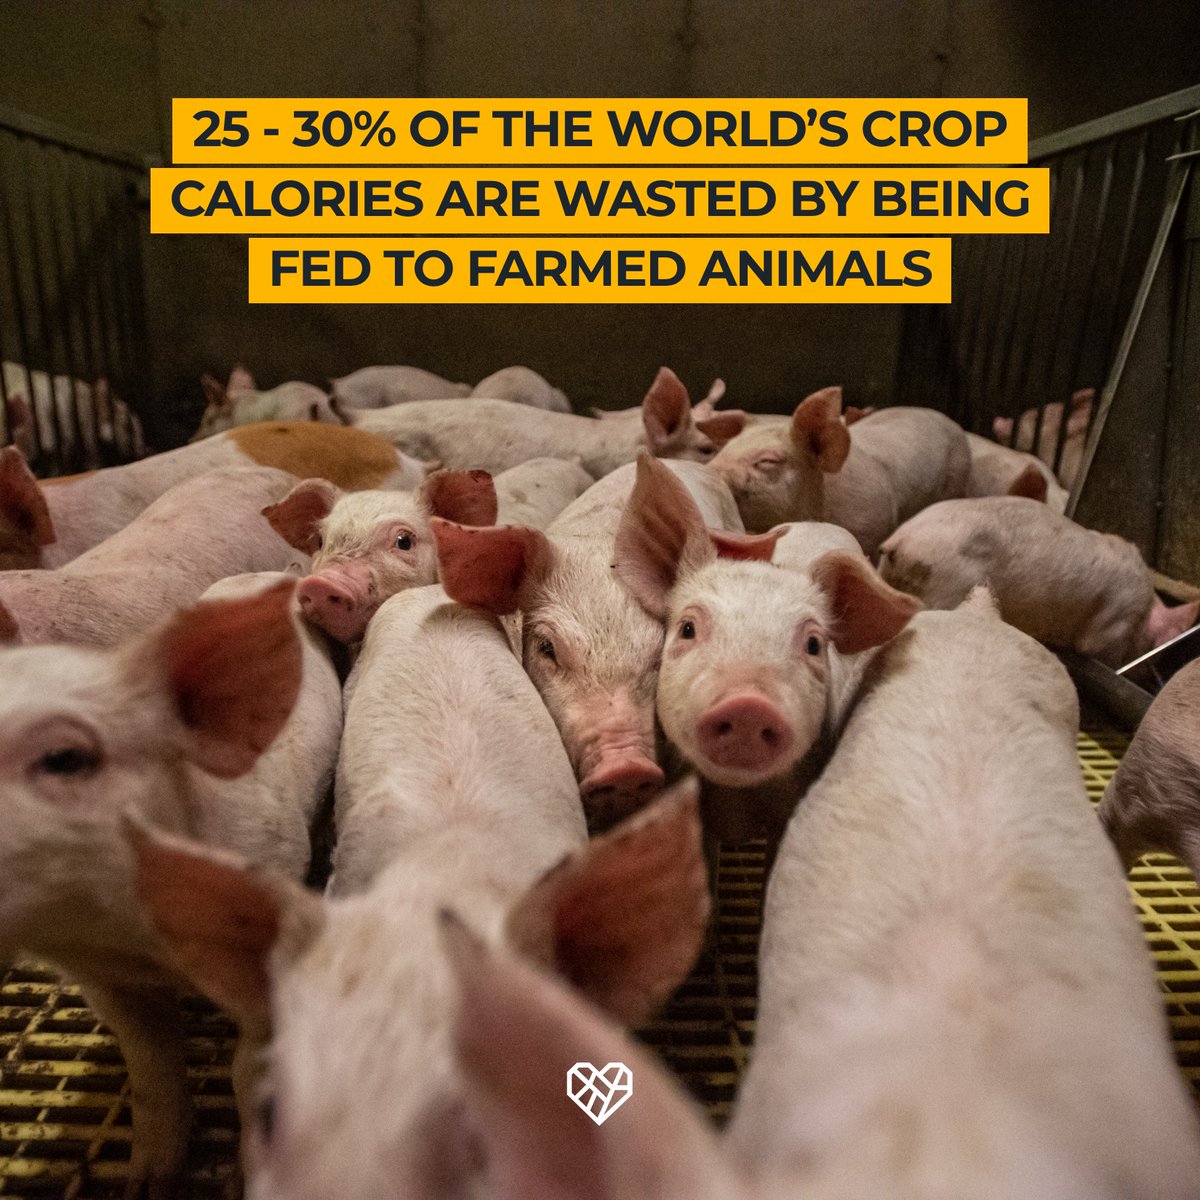 It's time to face the facts, animal agriculture is not sustainable. #Foodwasteactionweek